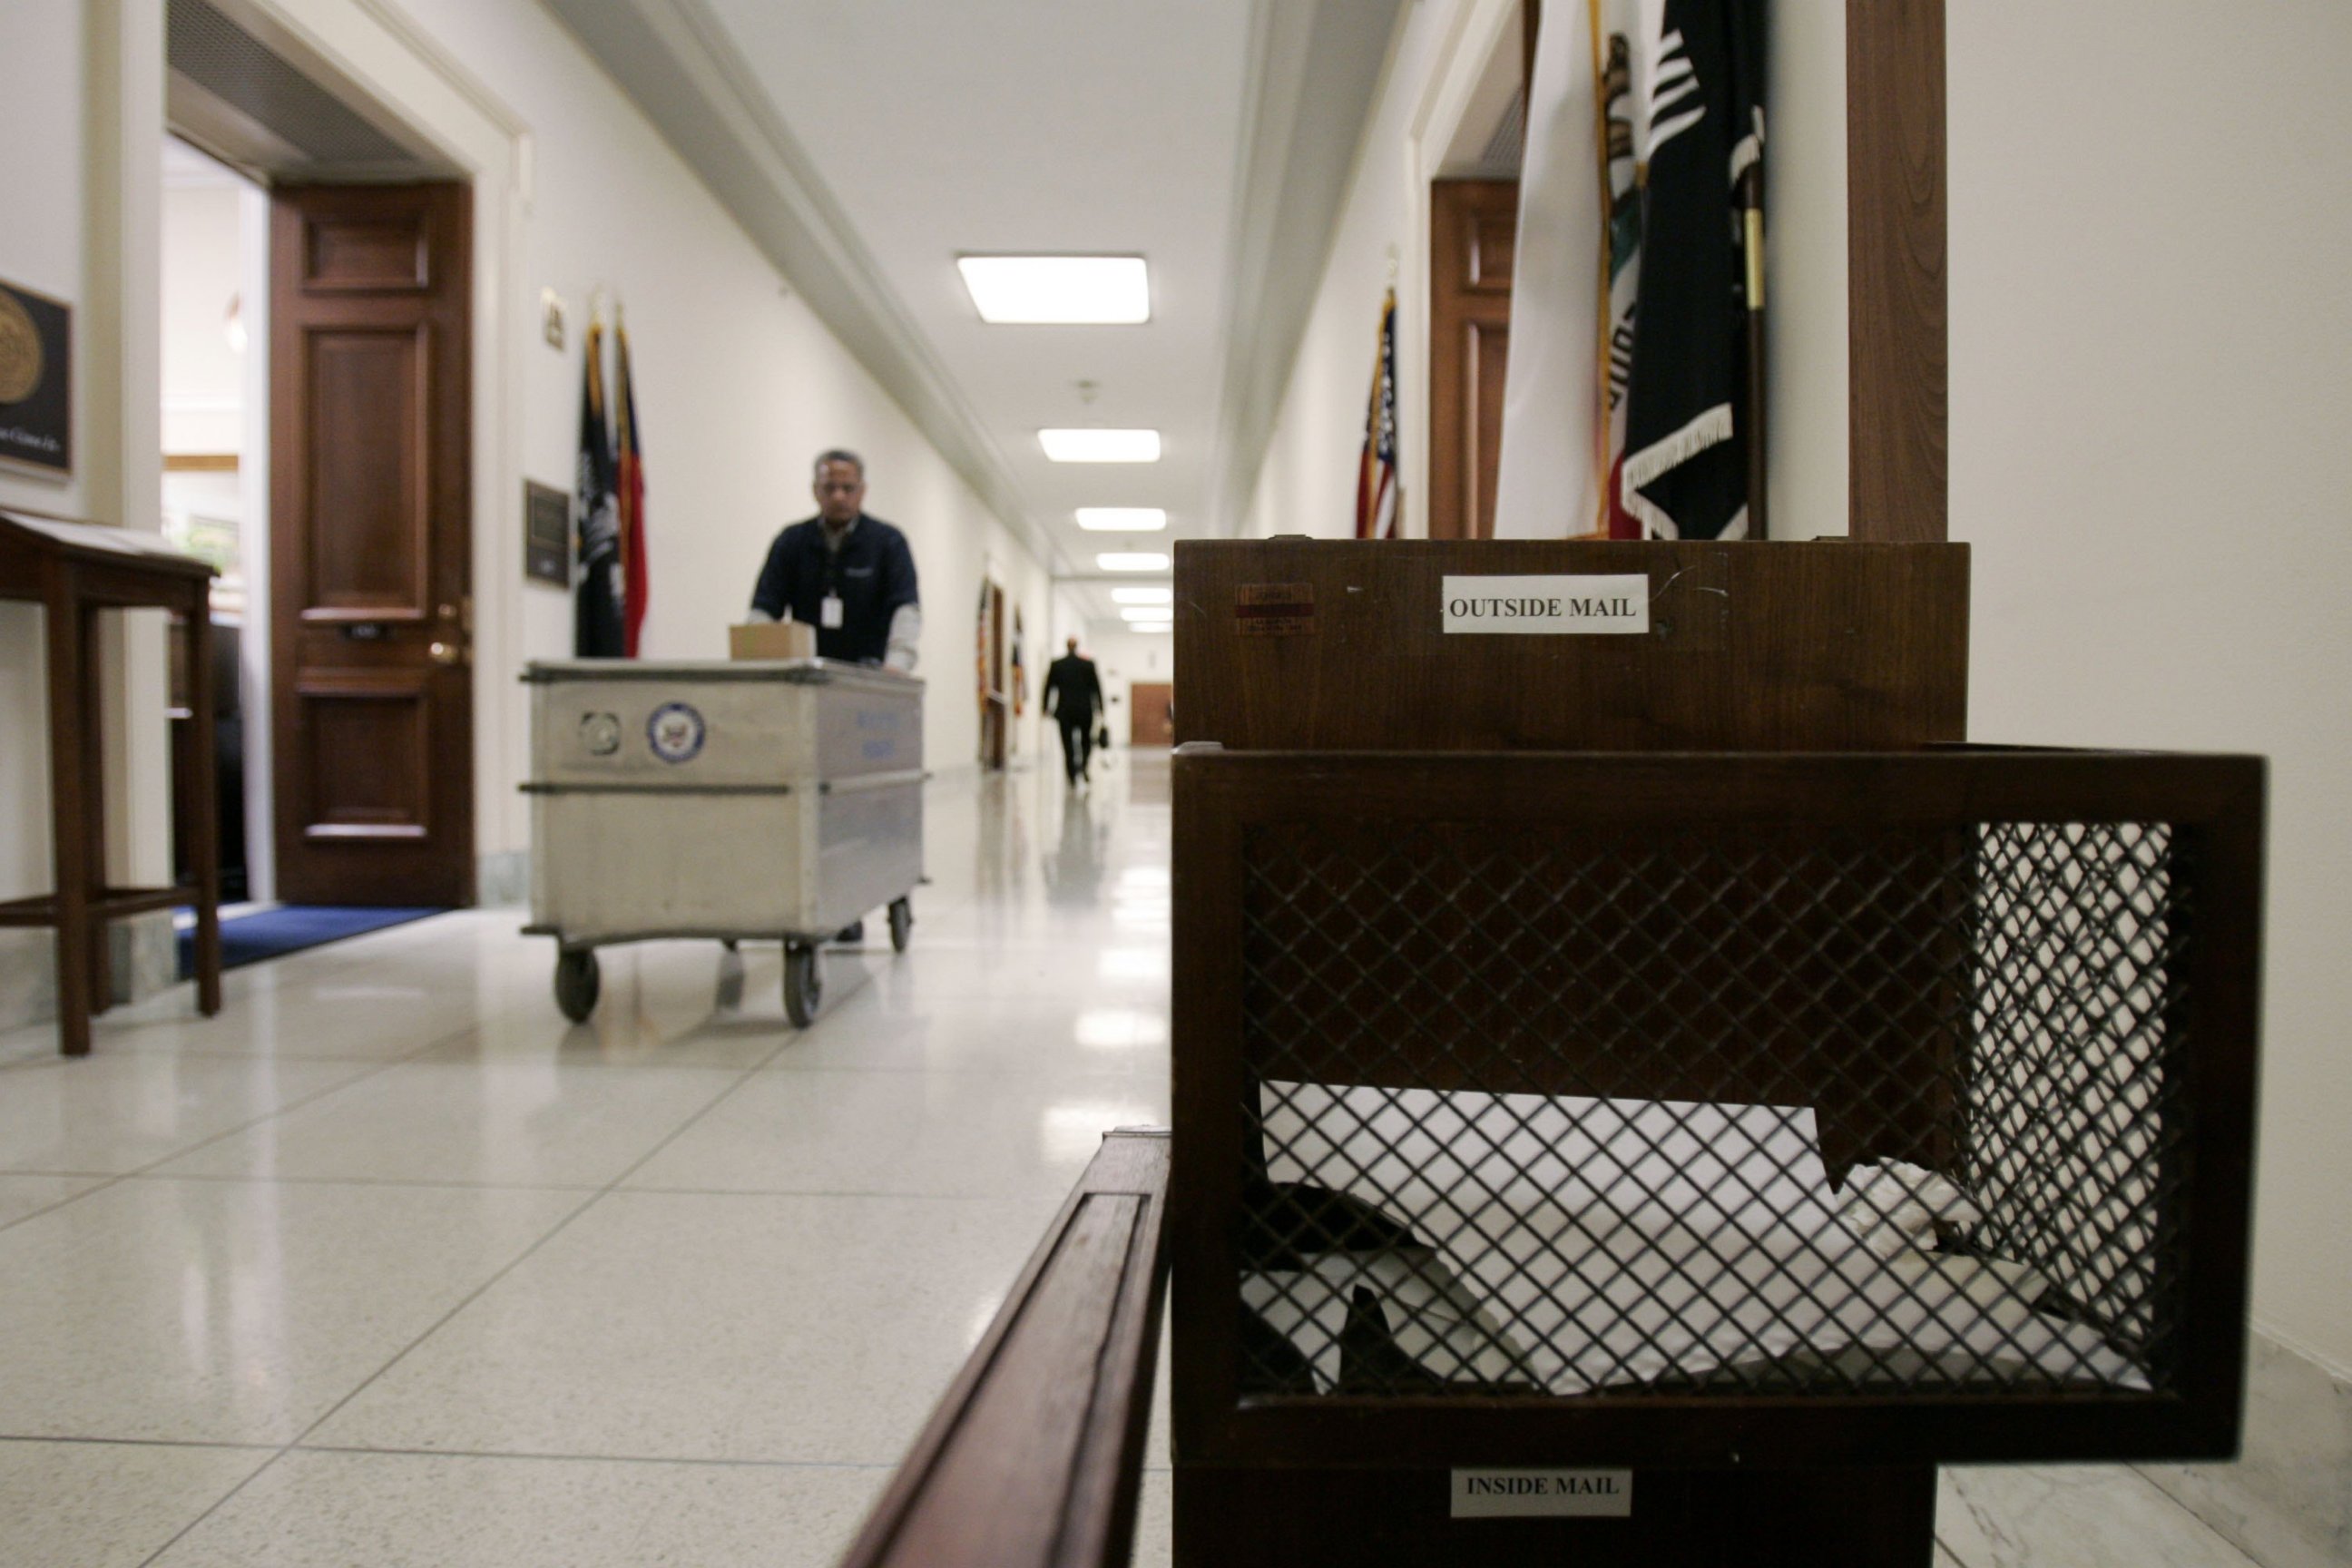 PHOTO: A mail bin fills up in the hallways of the Rayburn Building along with furniture, lamps and boxes from offices being moved and cleaned out on Dec. 13, 2006 on Capitol Hill in Washington, D.C.